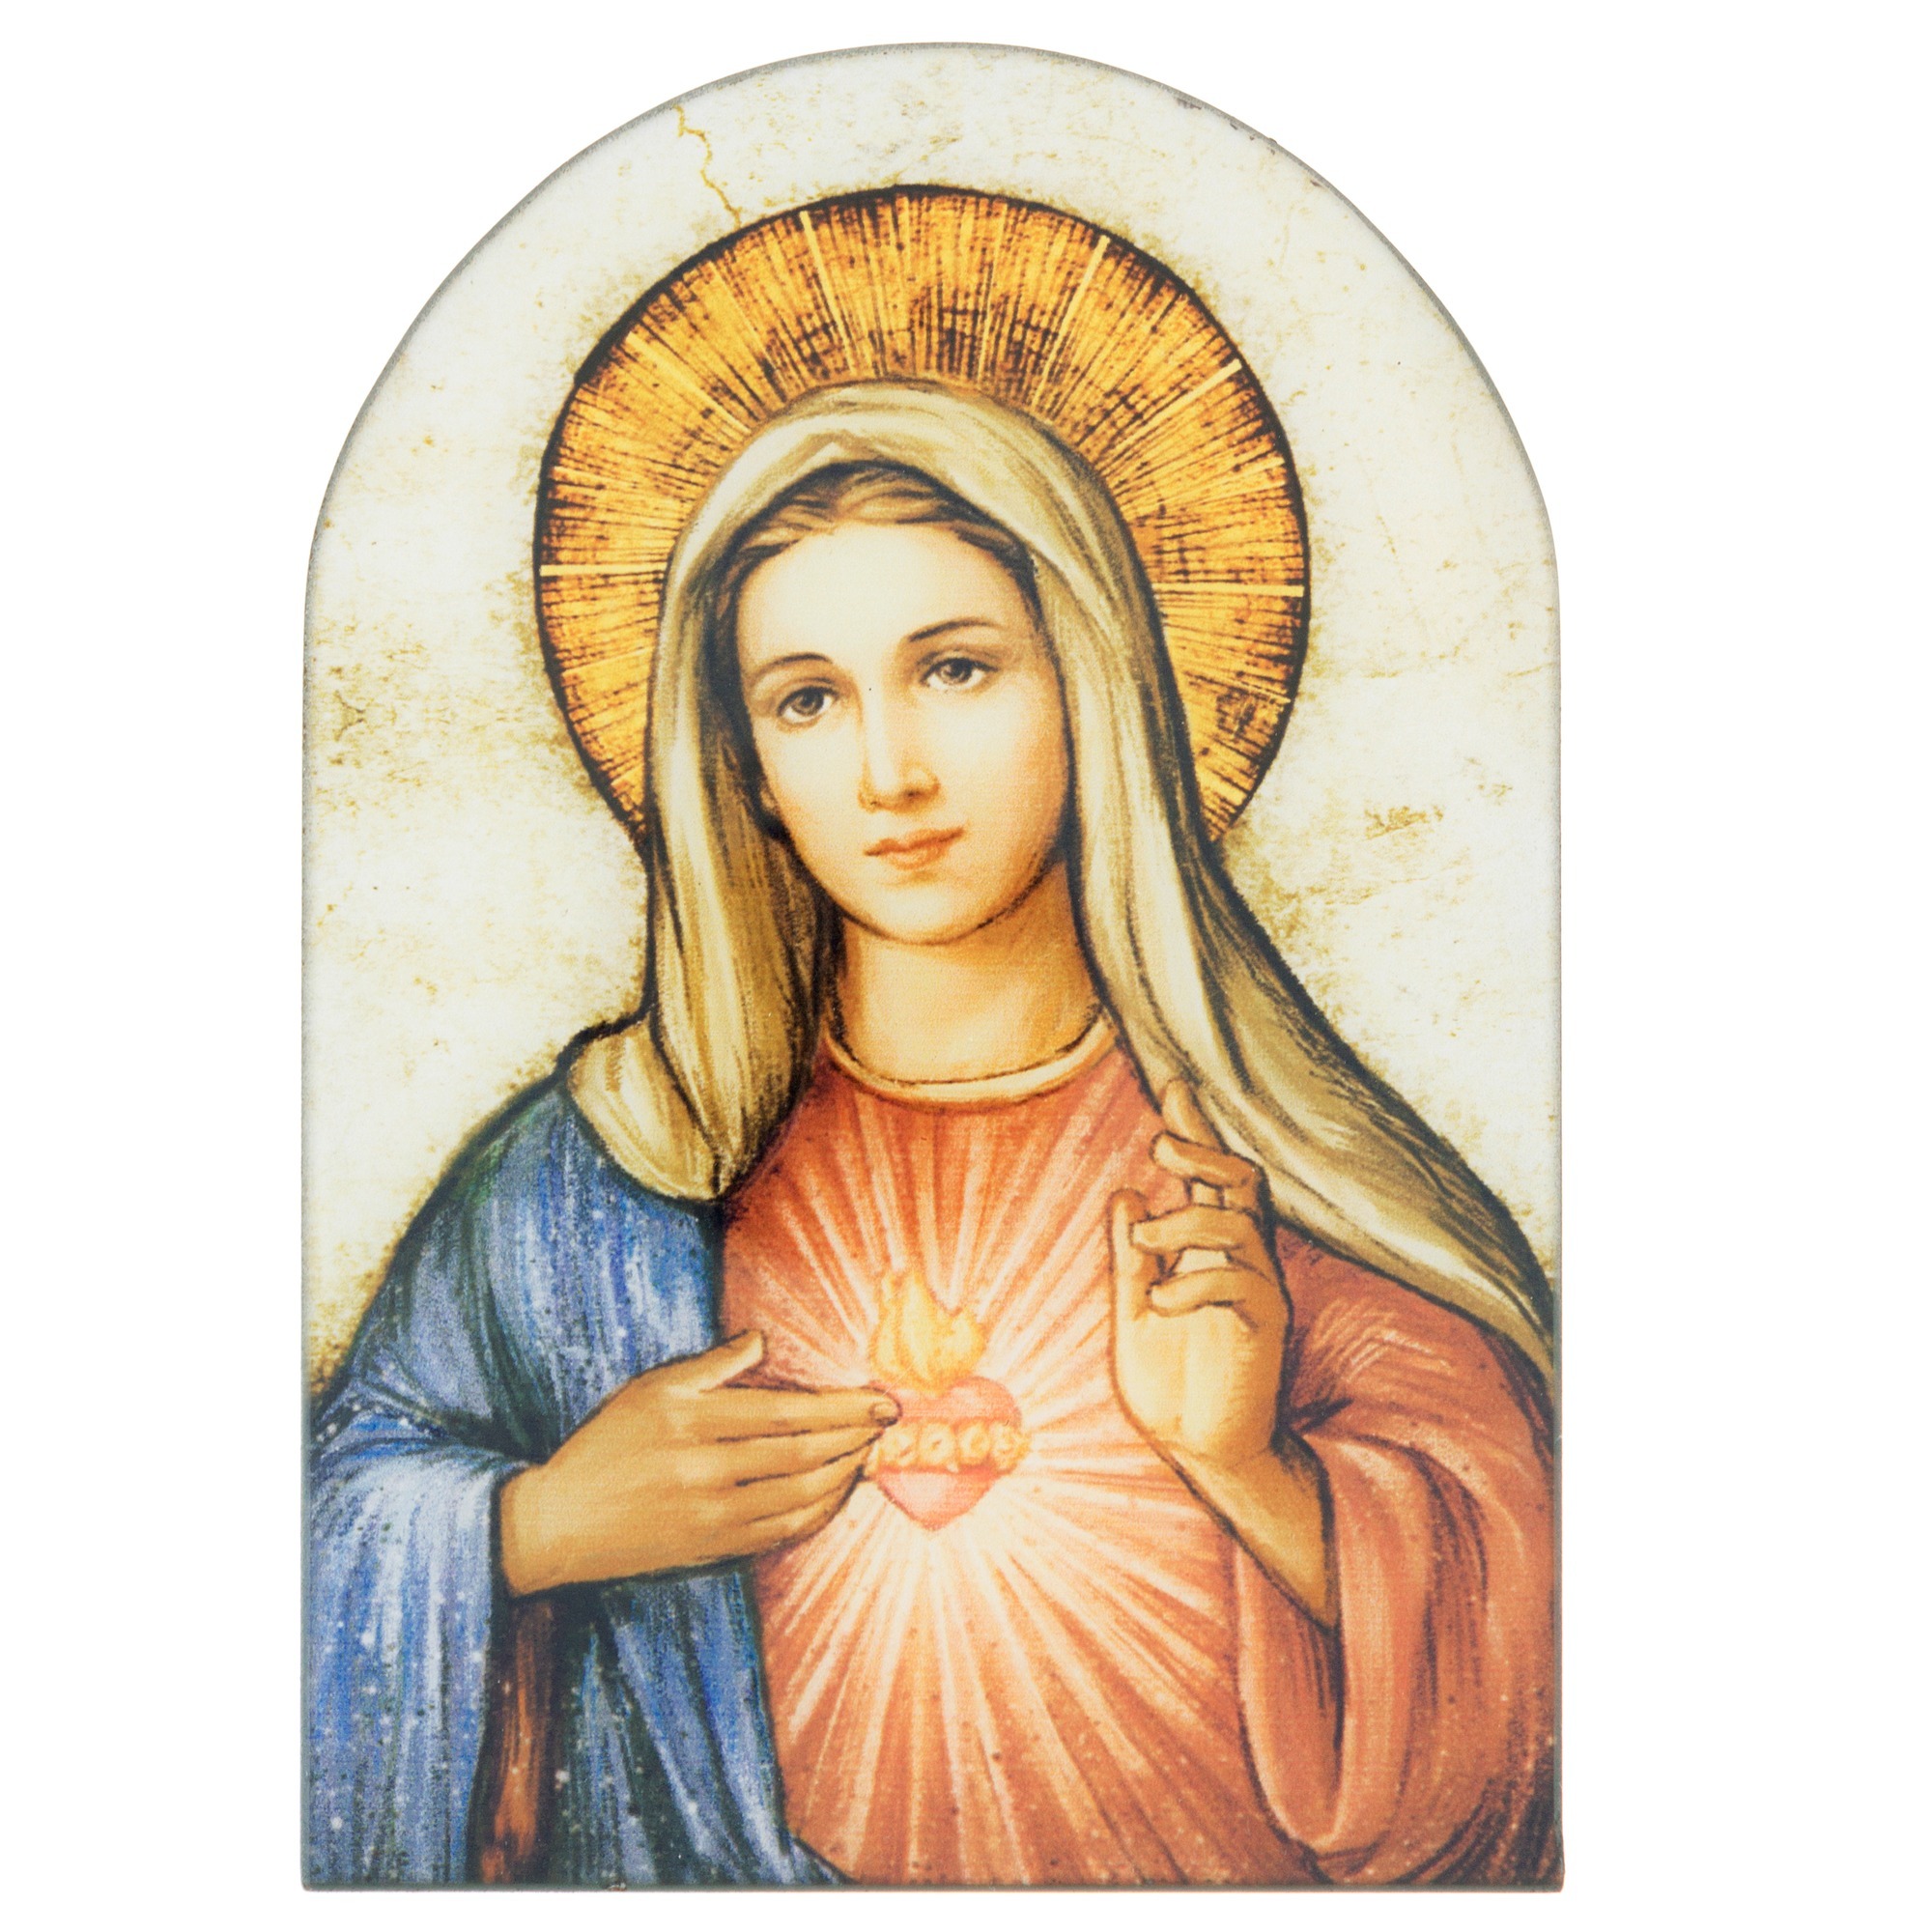 Immaculate Heart of Mary Plaque | The Catholic Company®